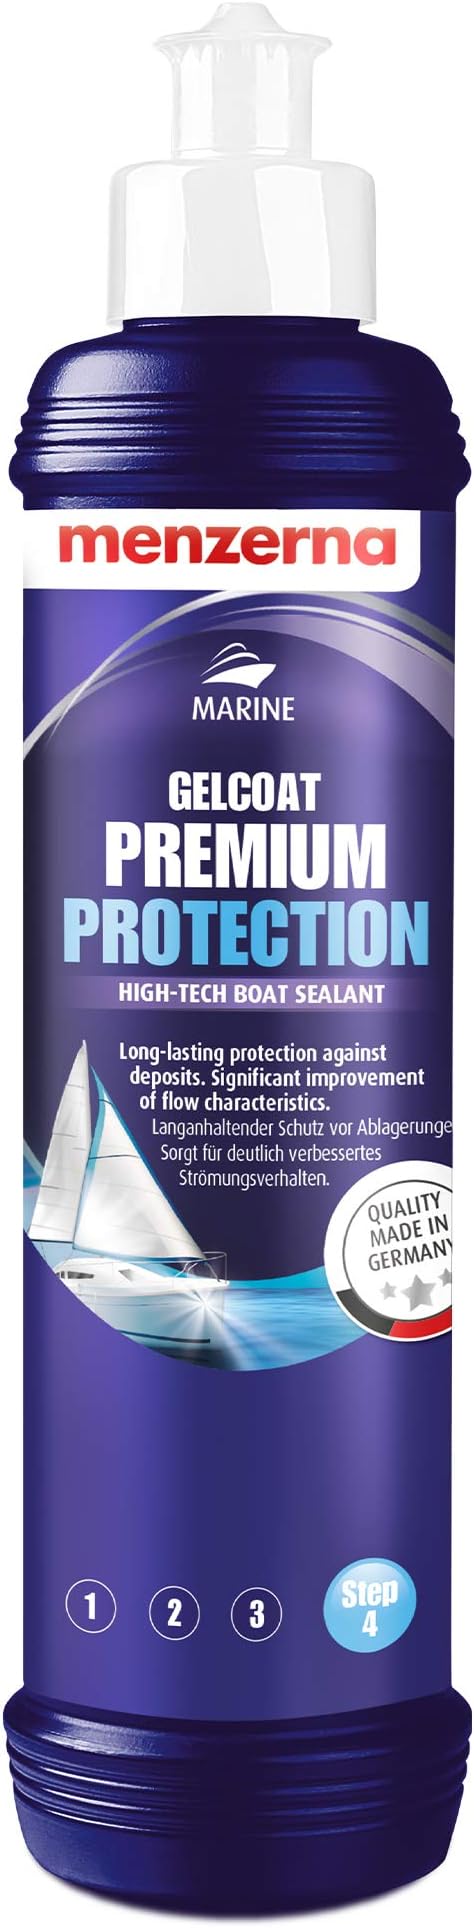 MENZERNA - Gelcoat Premium Protection (Protection pour gelcoat)